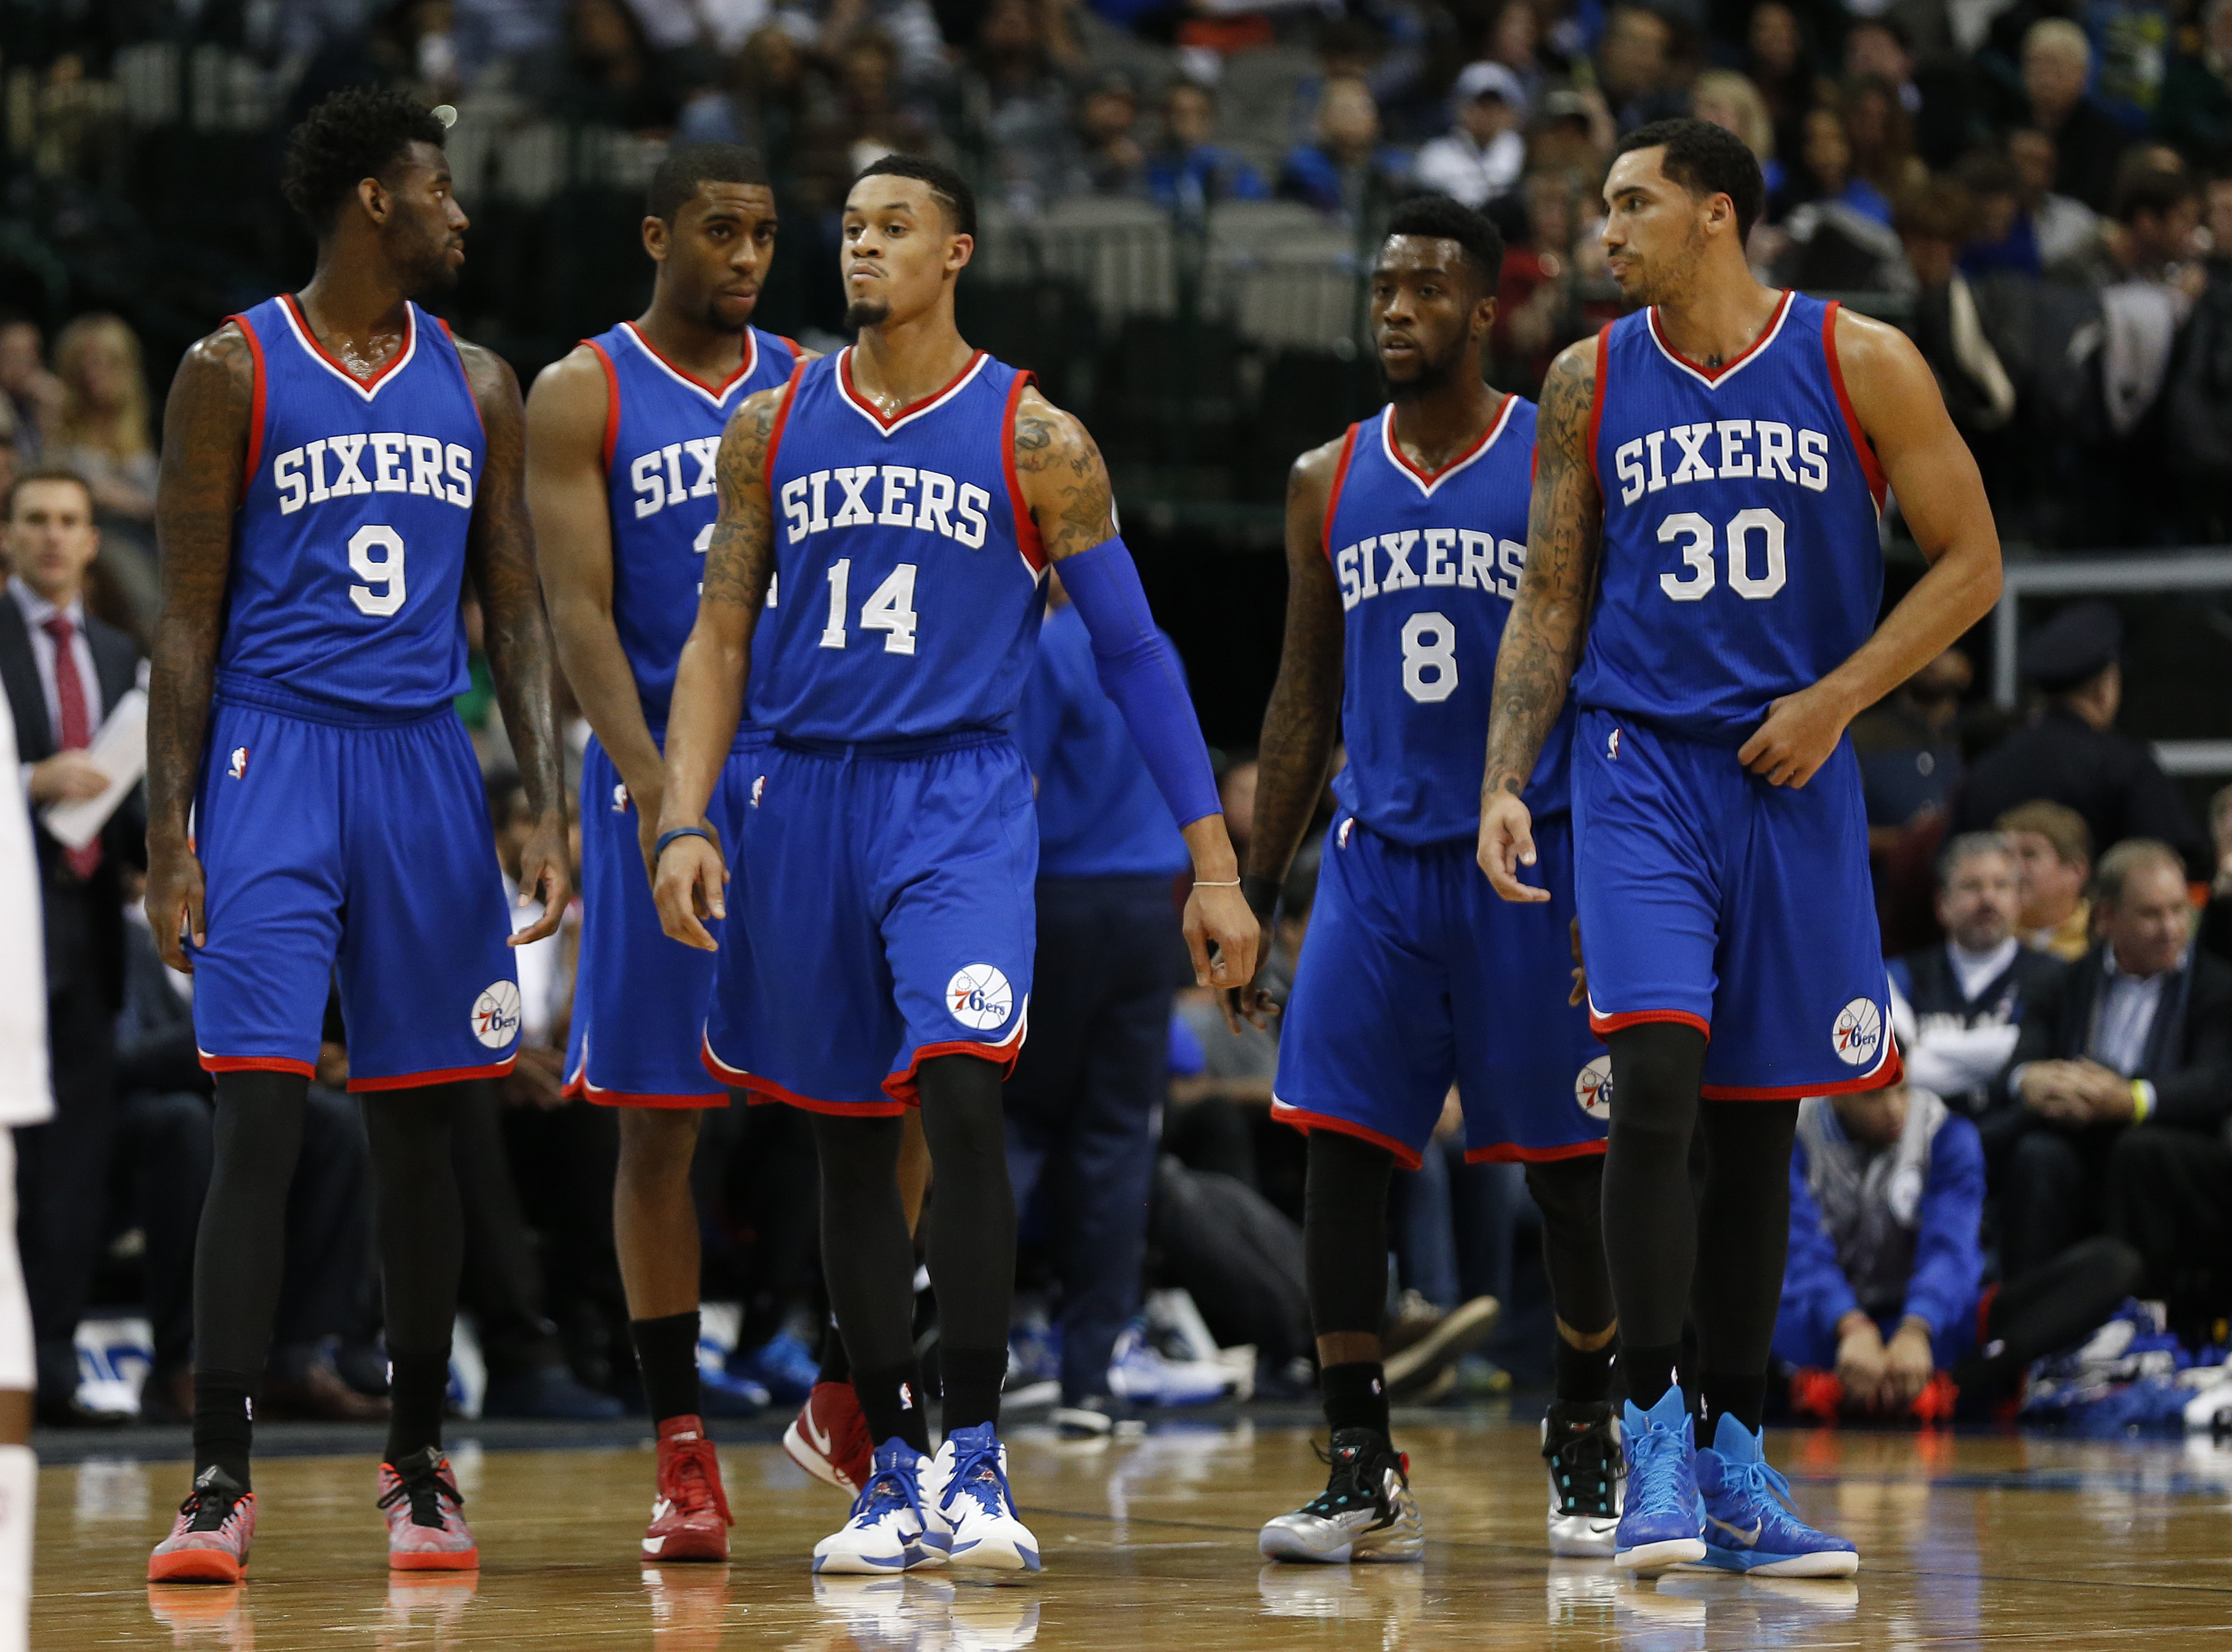 Sixers Most Questionable Decision? Let's Talk